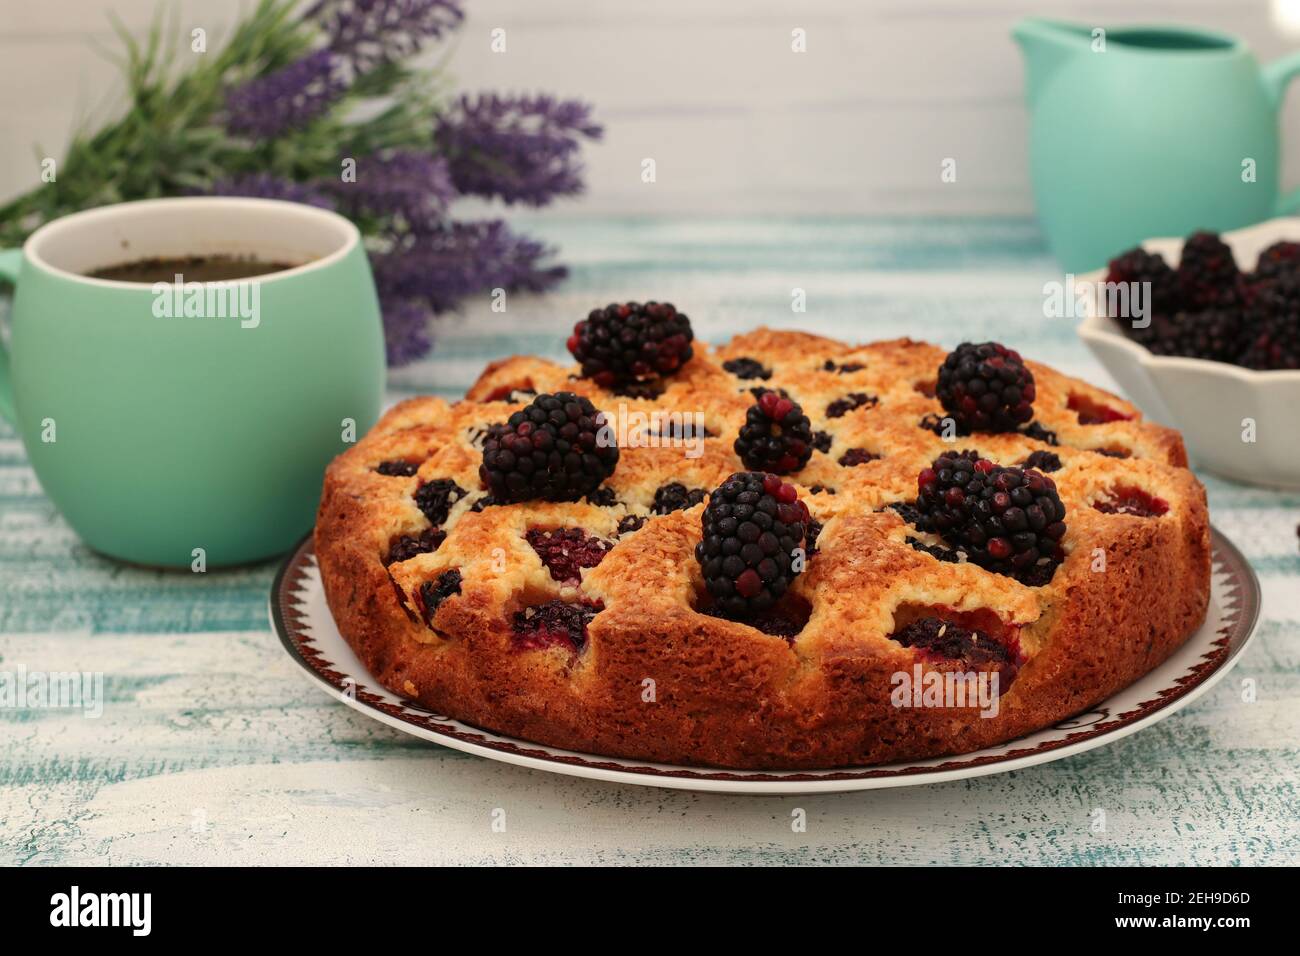 Homemade pie with blackberries and coconut chips on a light blue background. Closeup Stock Photo